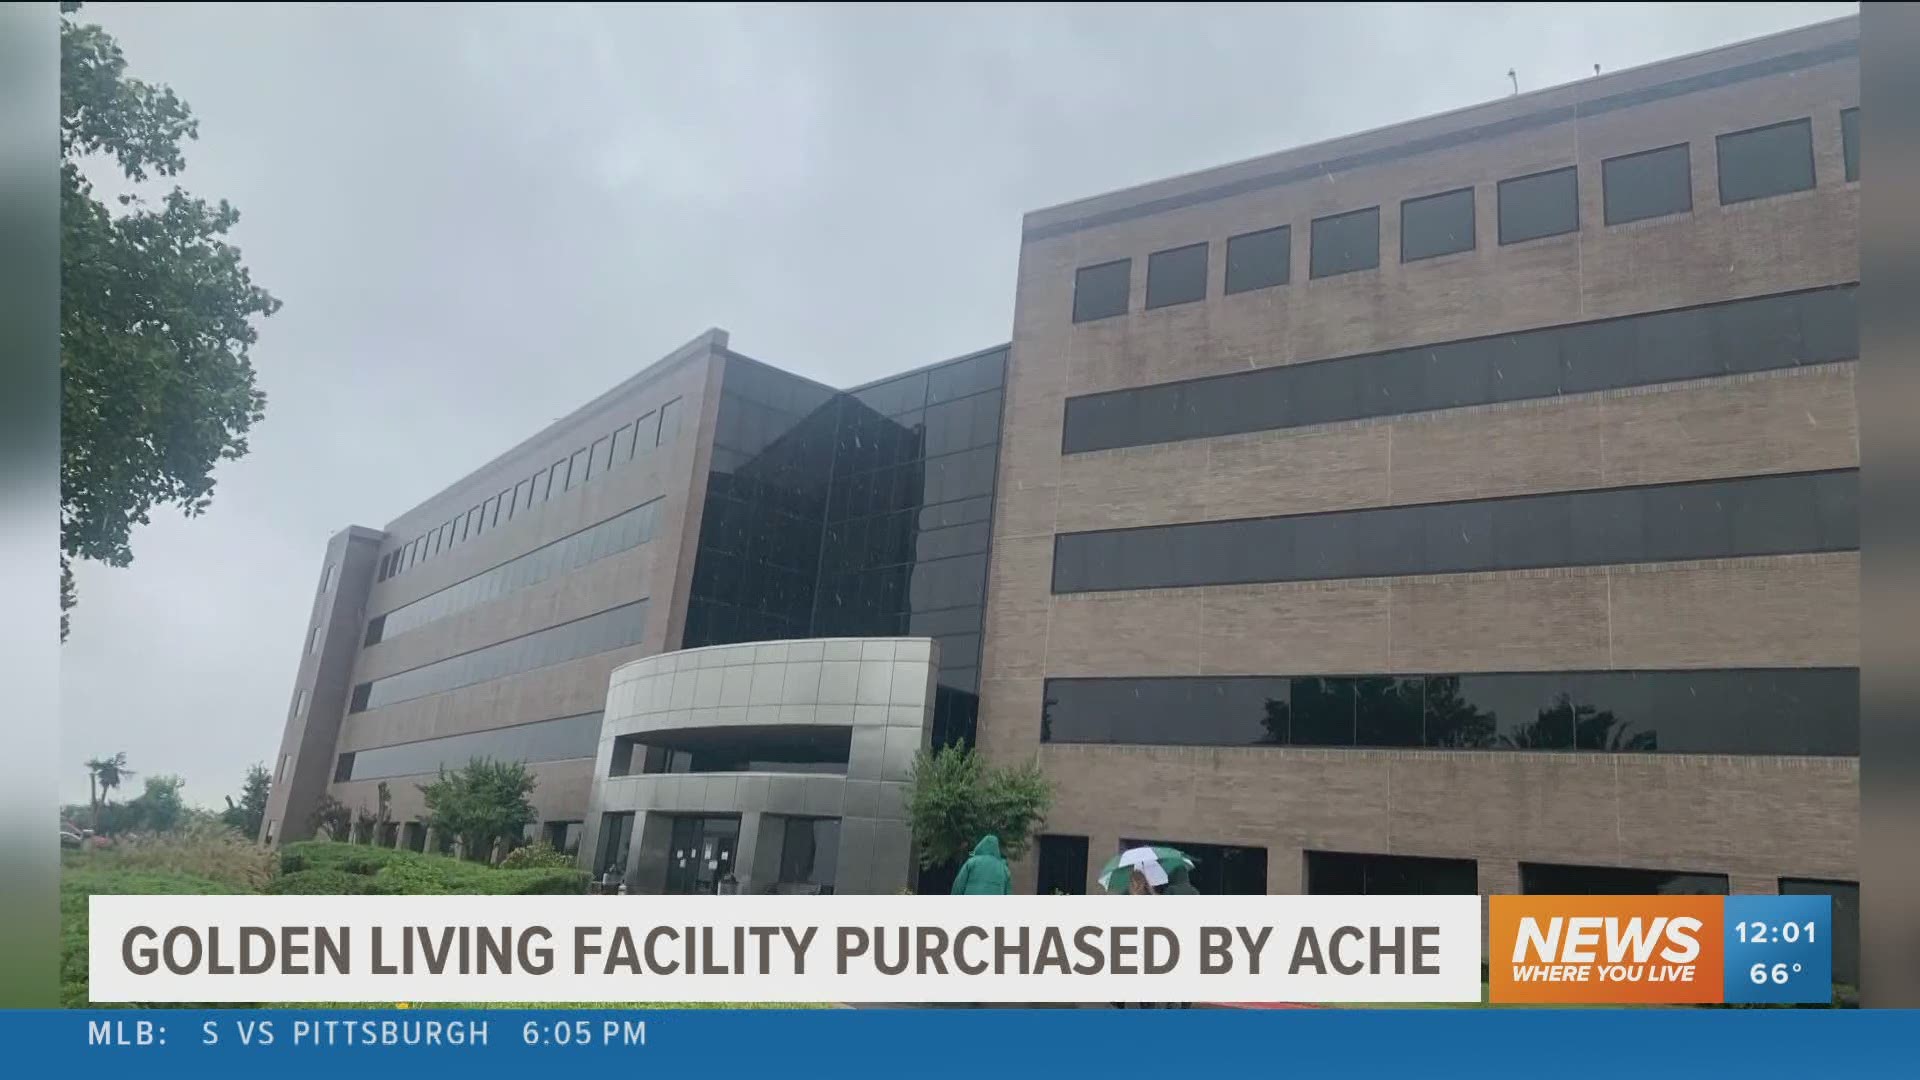 The Arkansas Colleges of Health Education is buying Golden Living's former headquarters in Fort Smith.